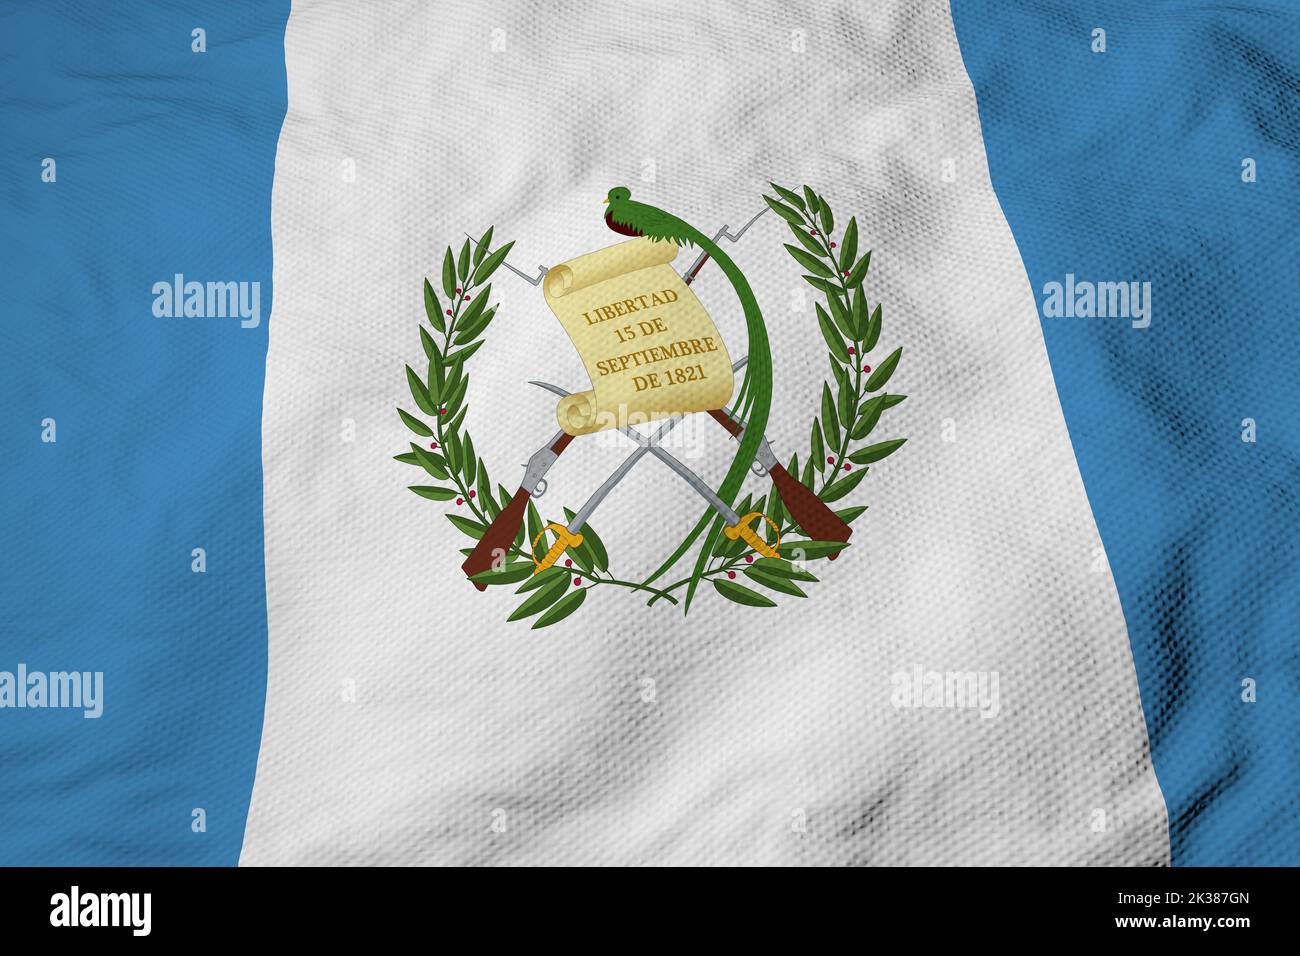 Full frame close-up on a waving Flag of Guatemala in 3D rendering. Stock Photo